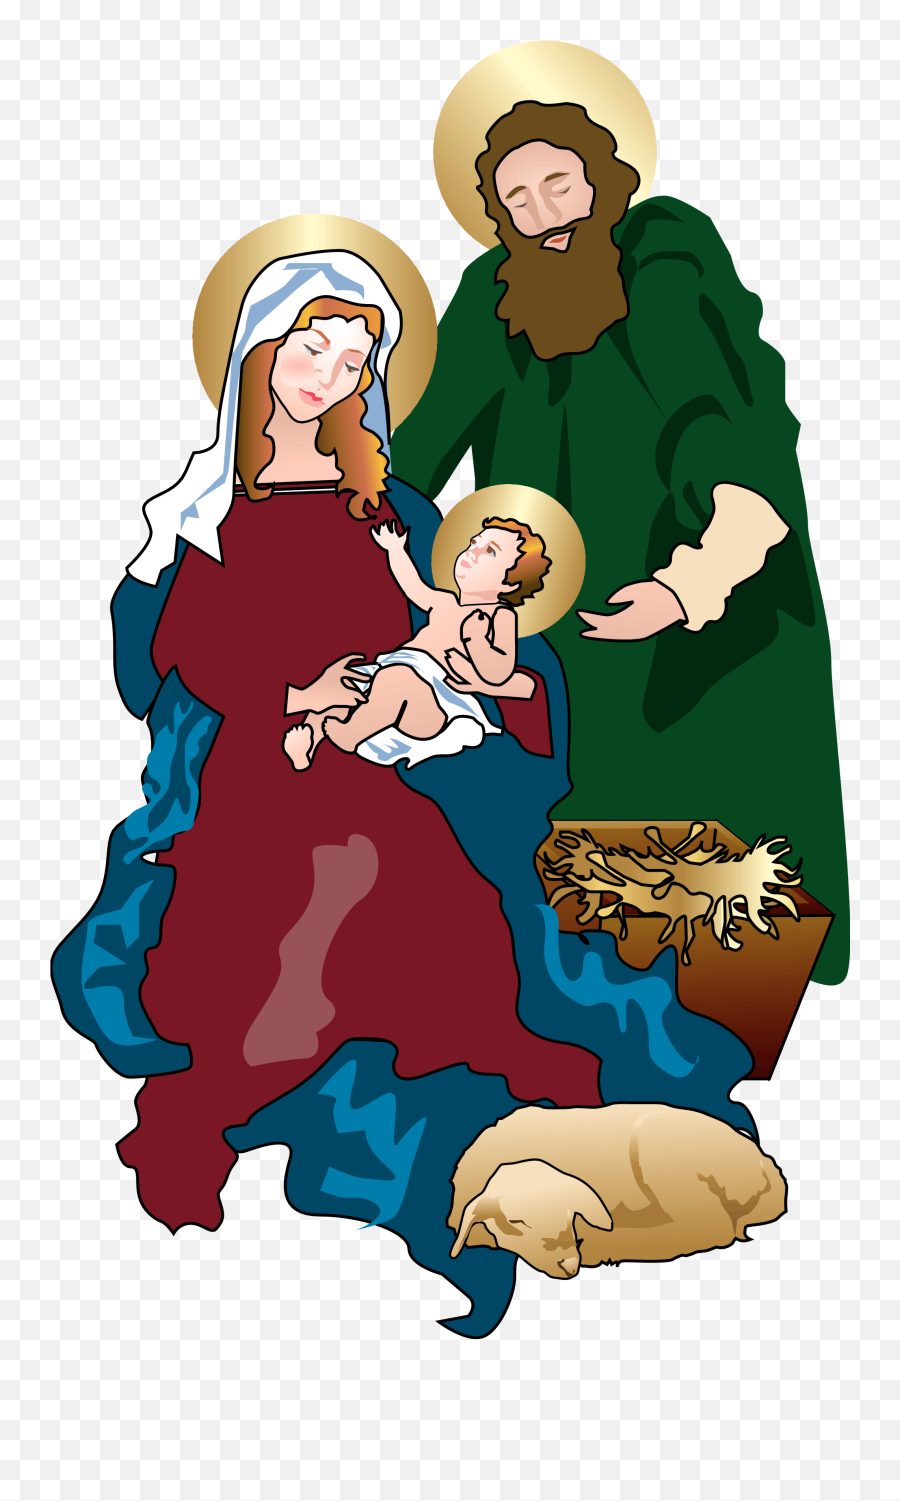 Download New Yearu0027s Eve Liturgy - Clip Art Holy Family Holy Family Clipart Emoji,New Years Eve Clipart